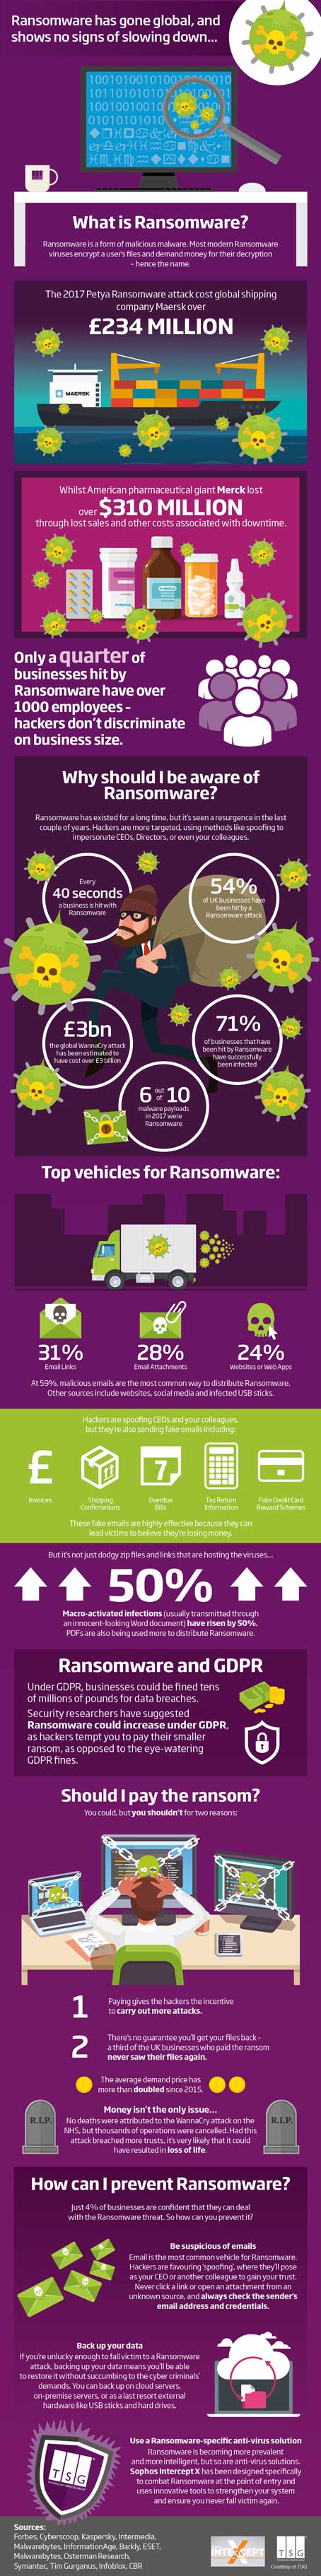 Ransomware Infographic - Technology Services Group